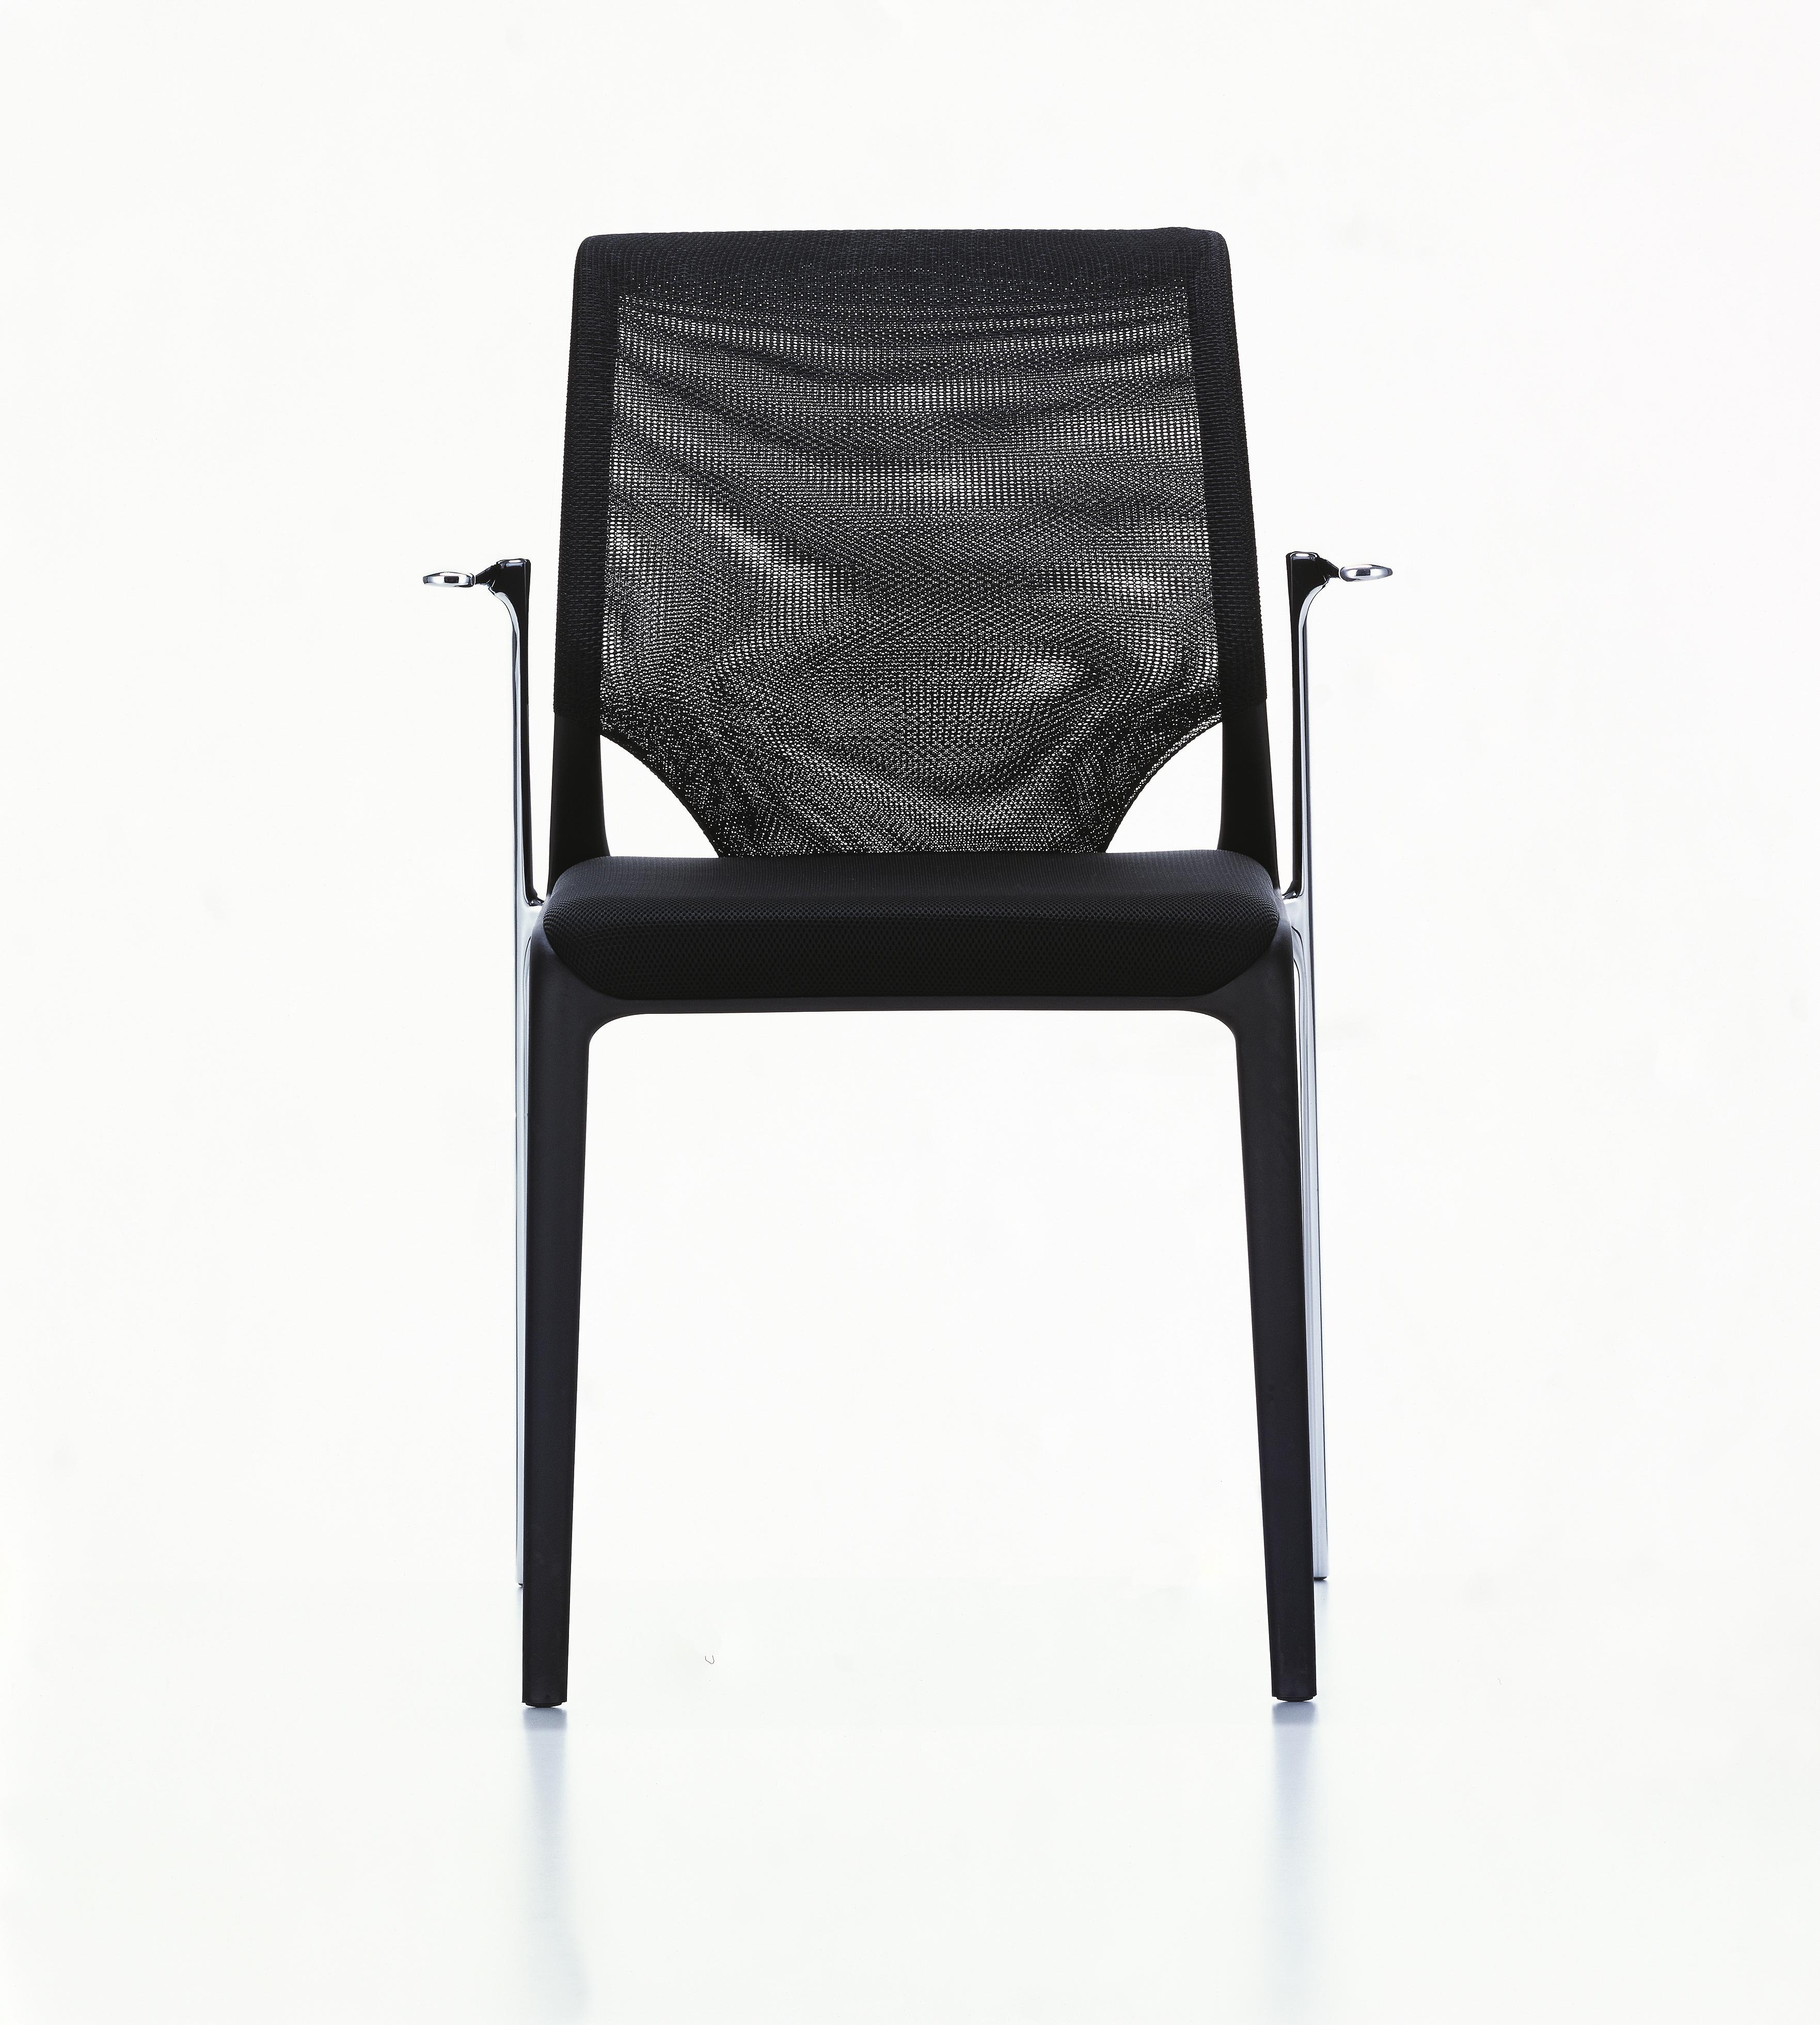 These items are currently only available in the United States.

Meda Slim is a robust universal visitor chair that offers exceptional comfort. The elegant and sleek chair can be used wherever comfortable seating is required for extended periods of